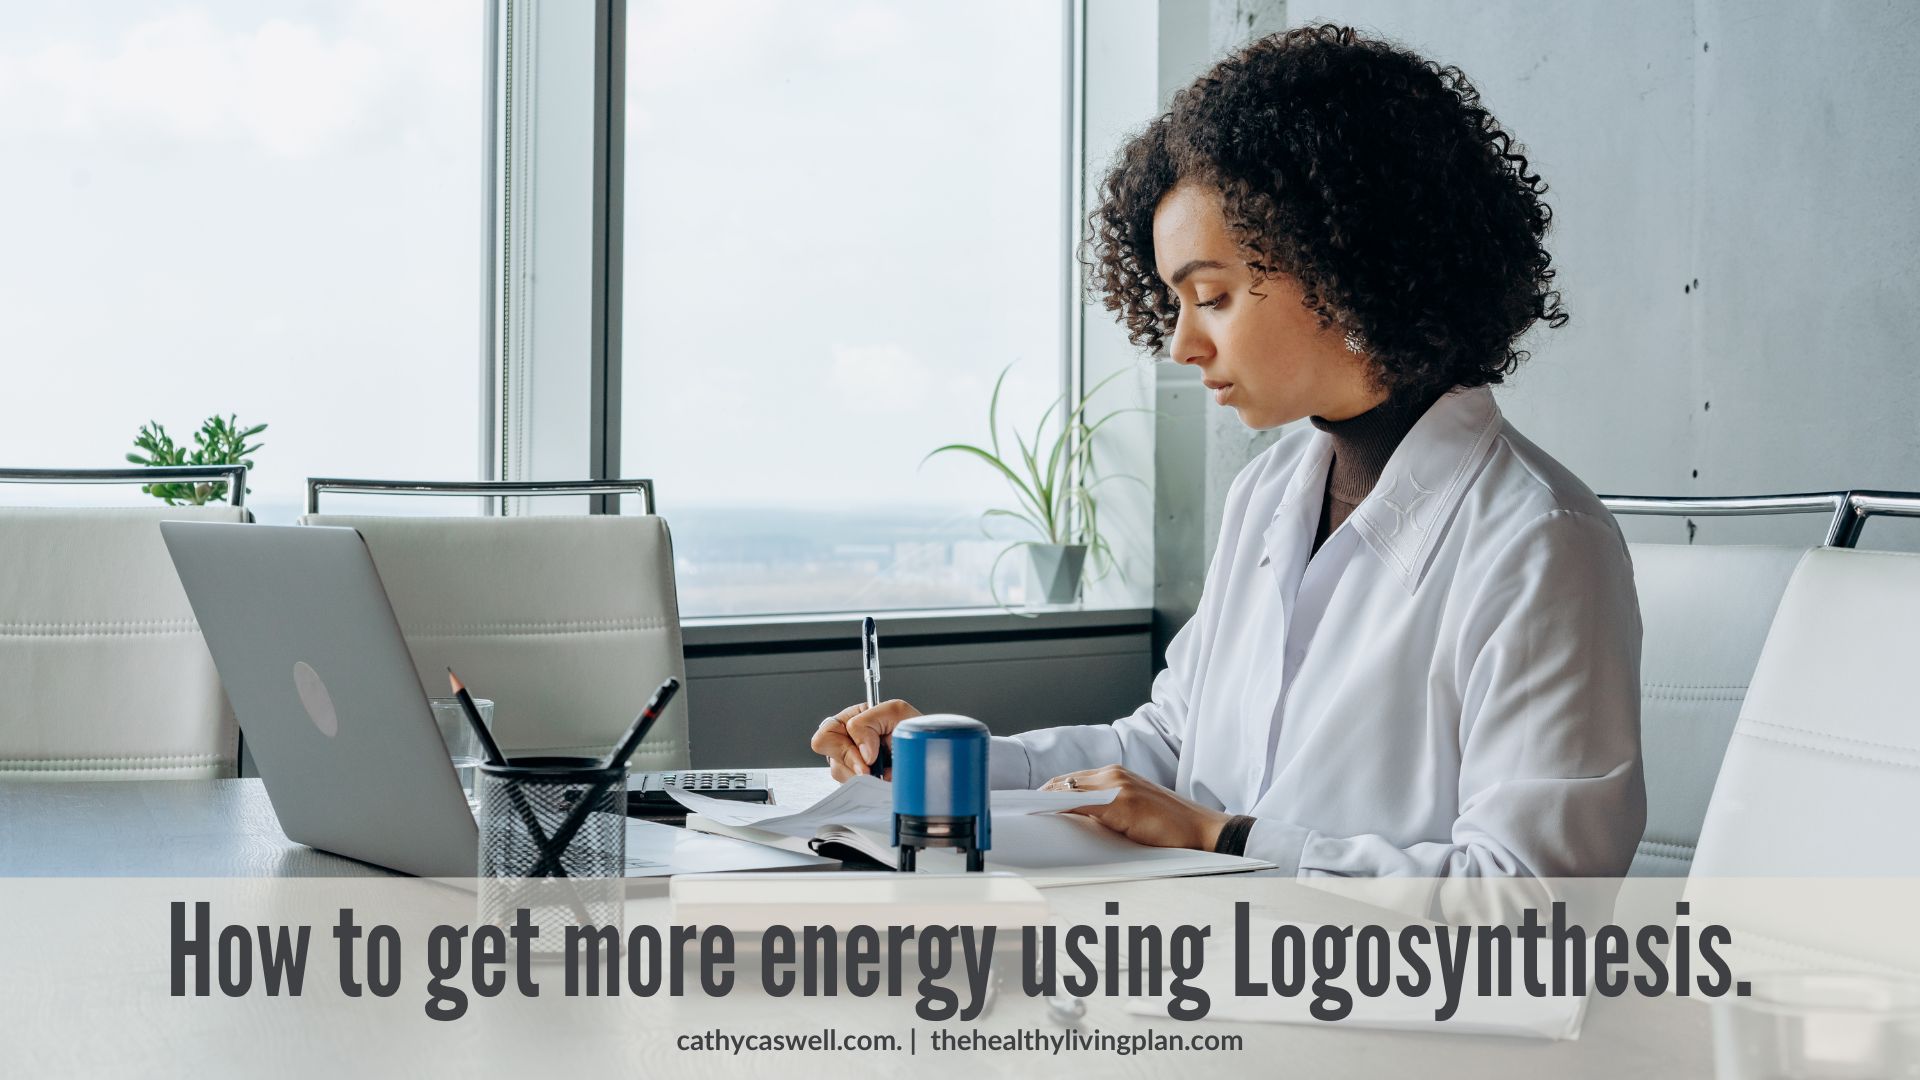 How to get more energy for healthier living using Logosynthesis by Cathy Caswell